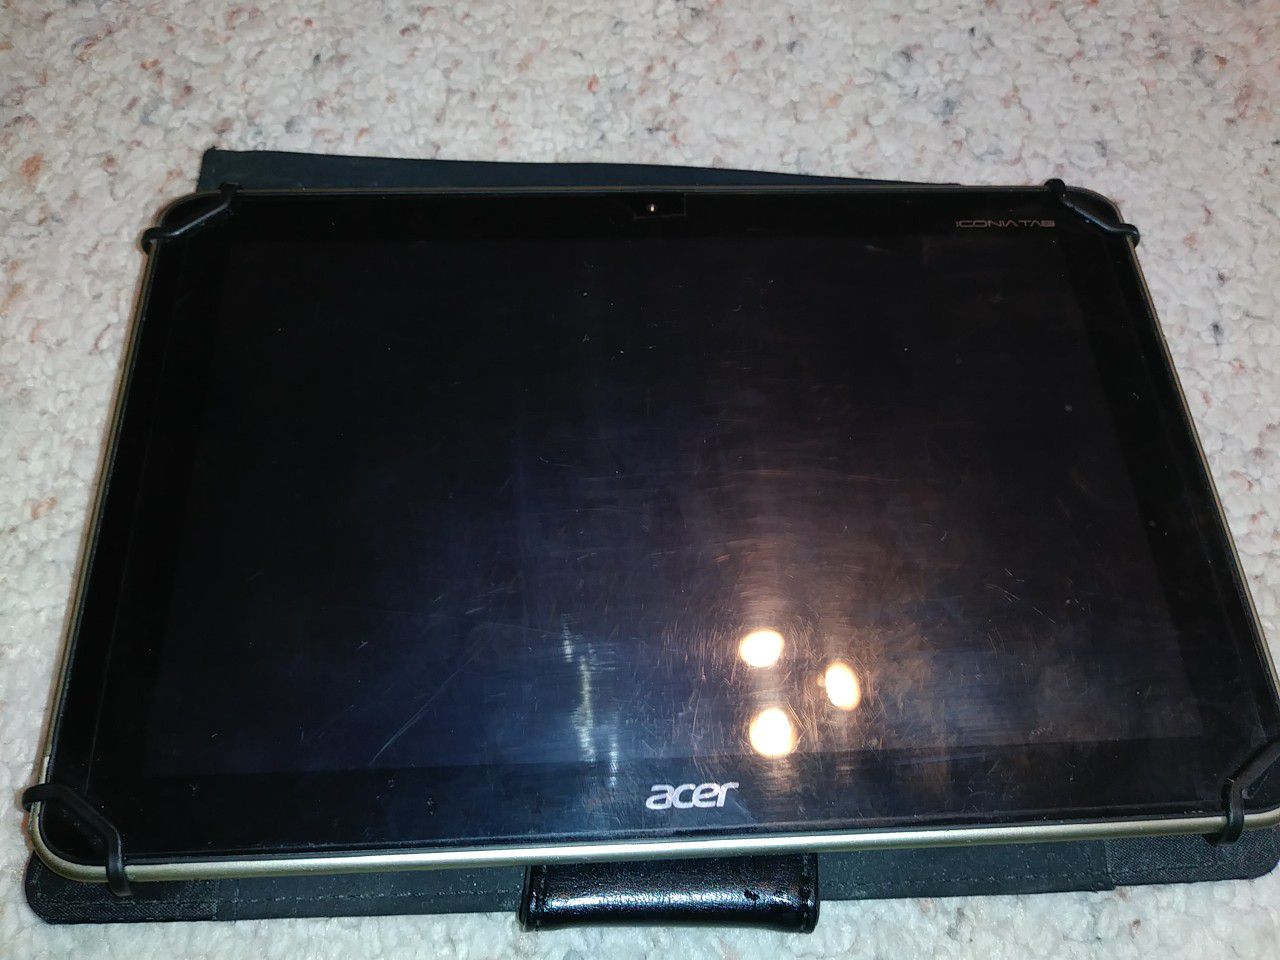 Acer A210 Iconia Tablet